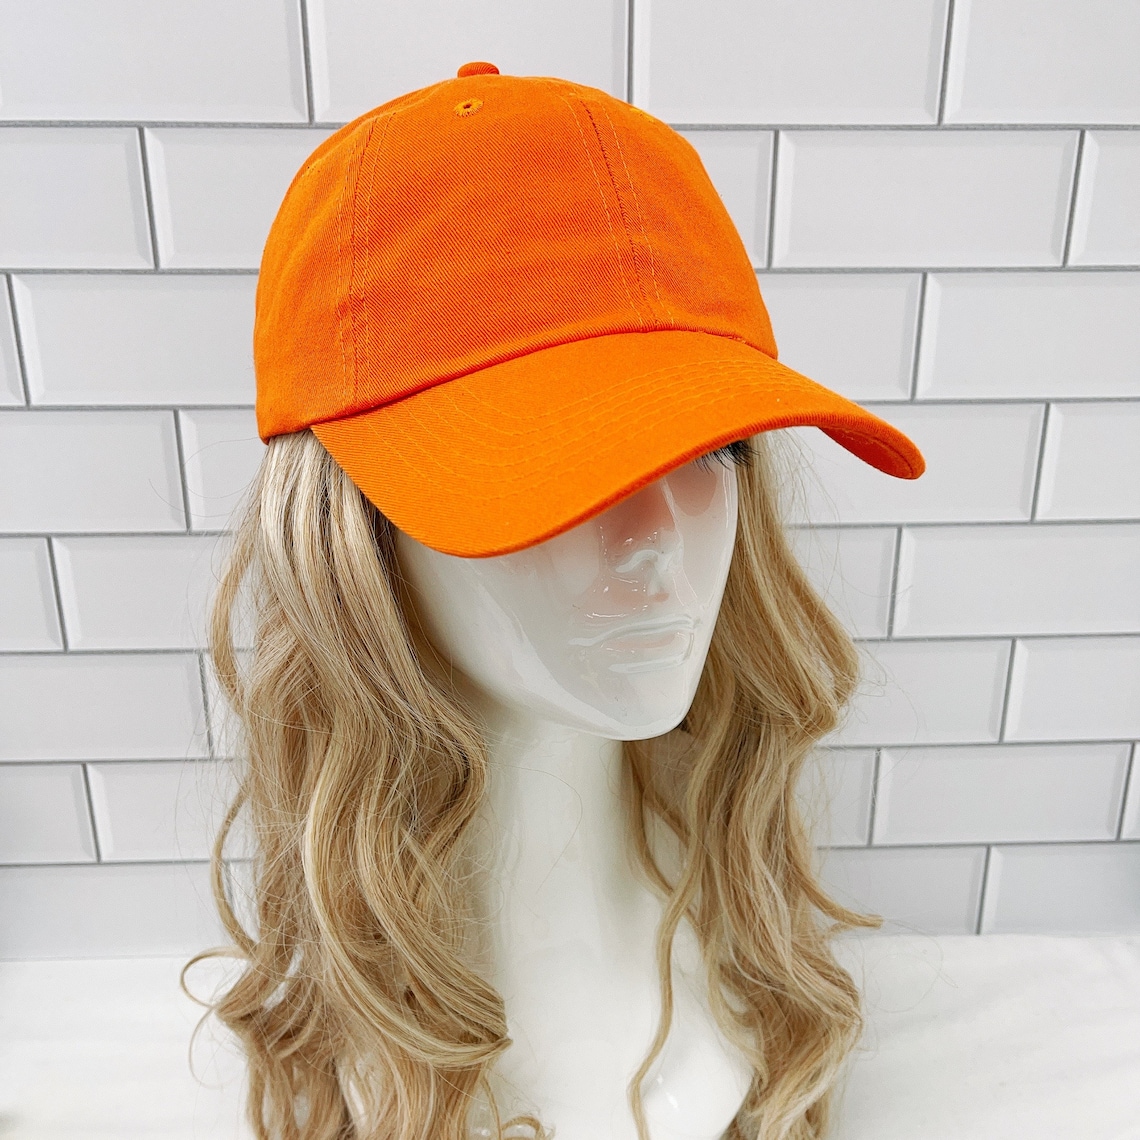 100% Cotton Soft Baseball Cap Solid Plain Caps for Women and | Etsy